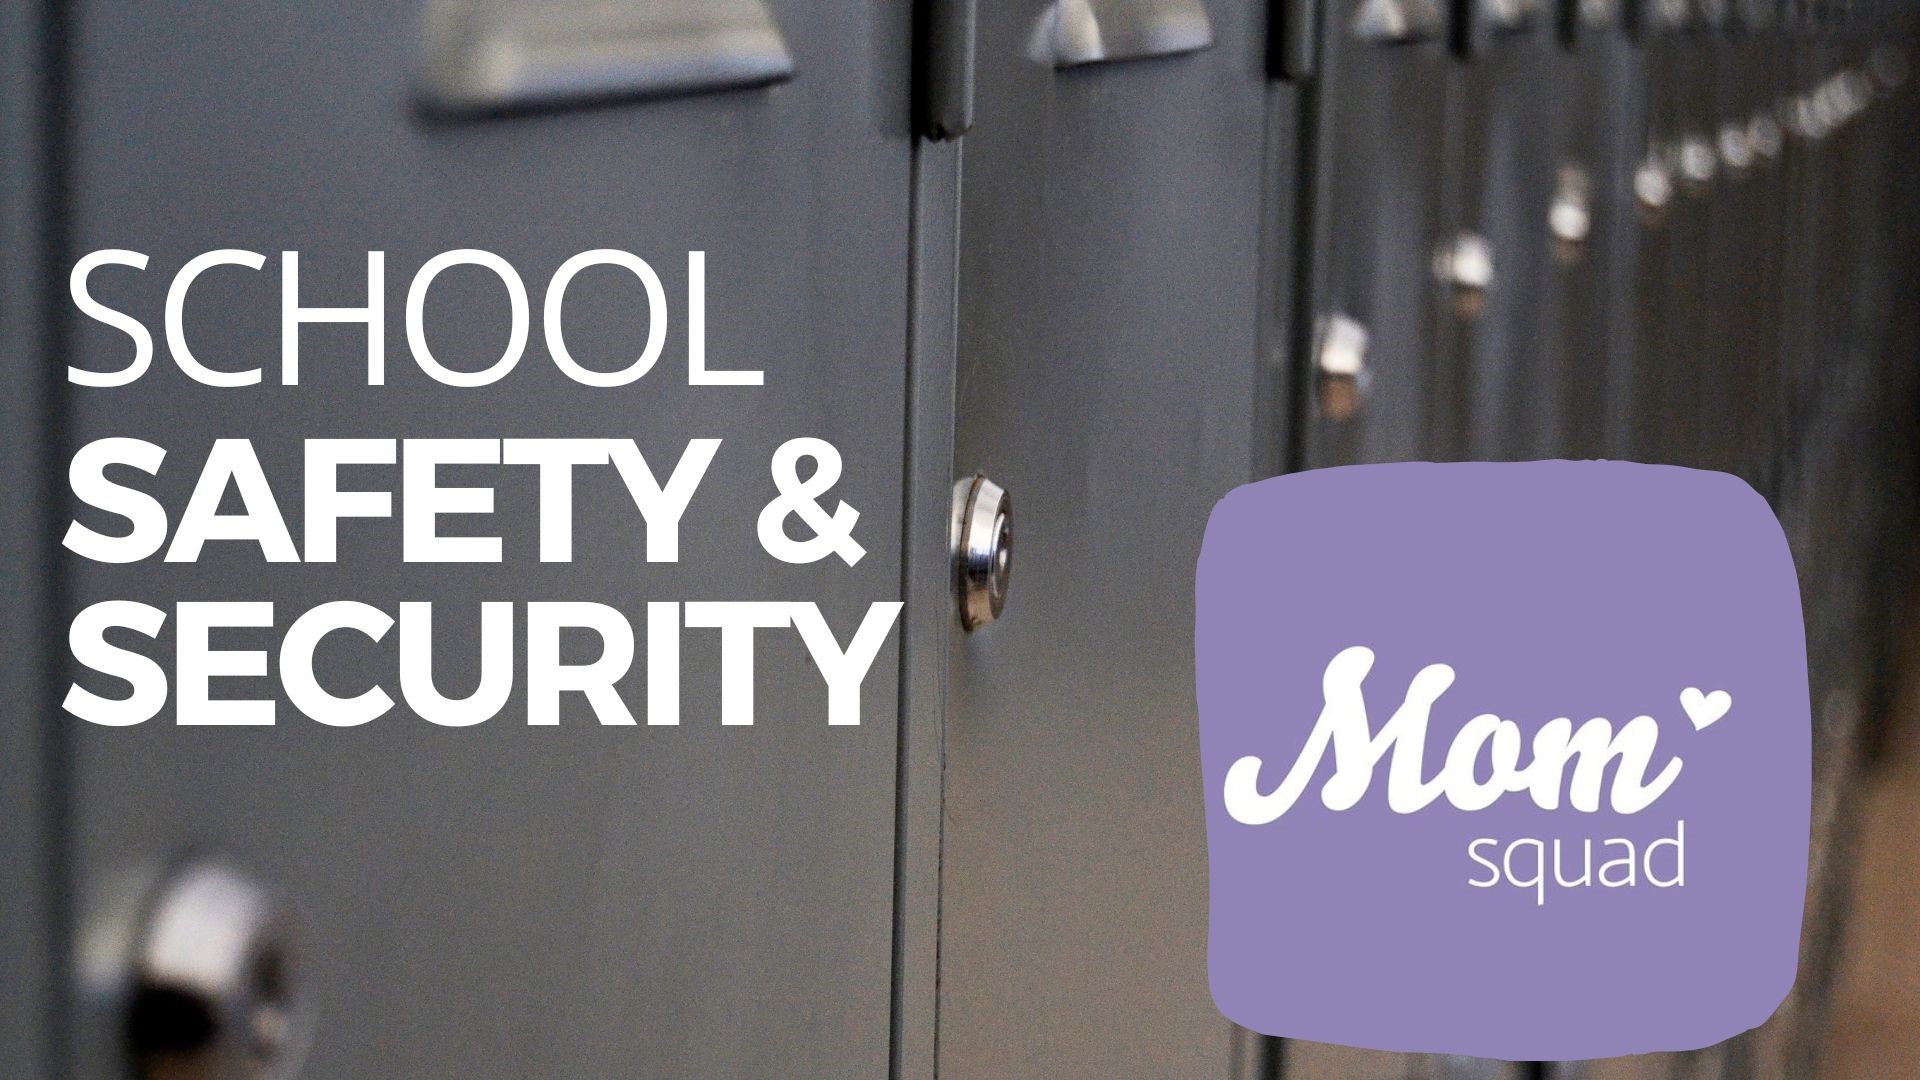 A look at how schools are changing protocols and designs in order to keep kids safe. Maureen Kyle sits down with a security expert to talk school safety.